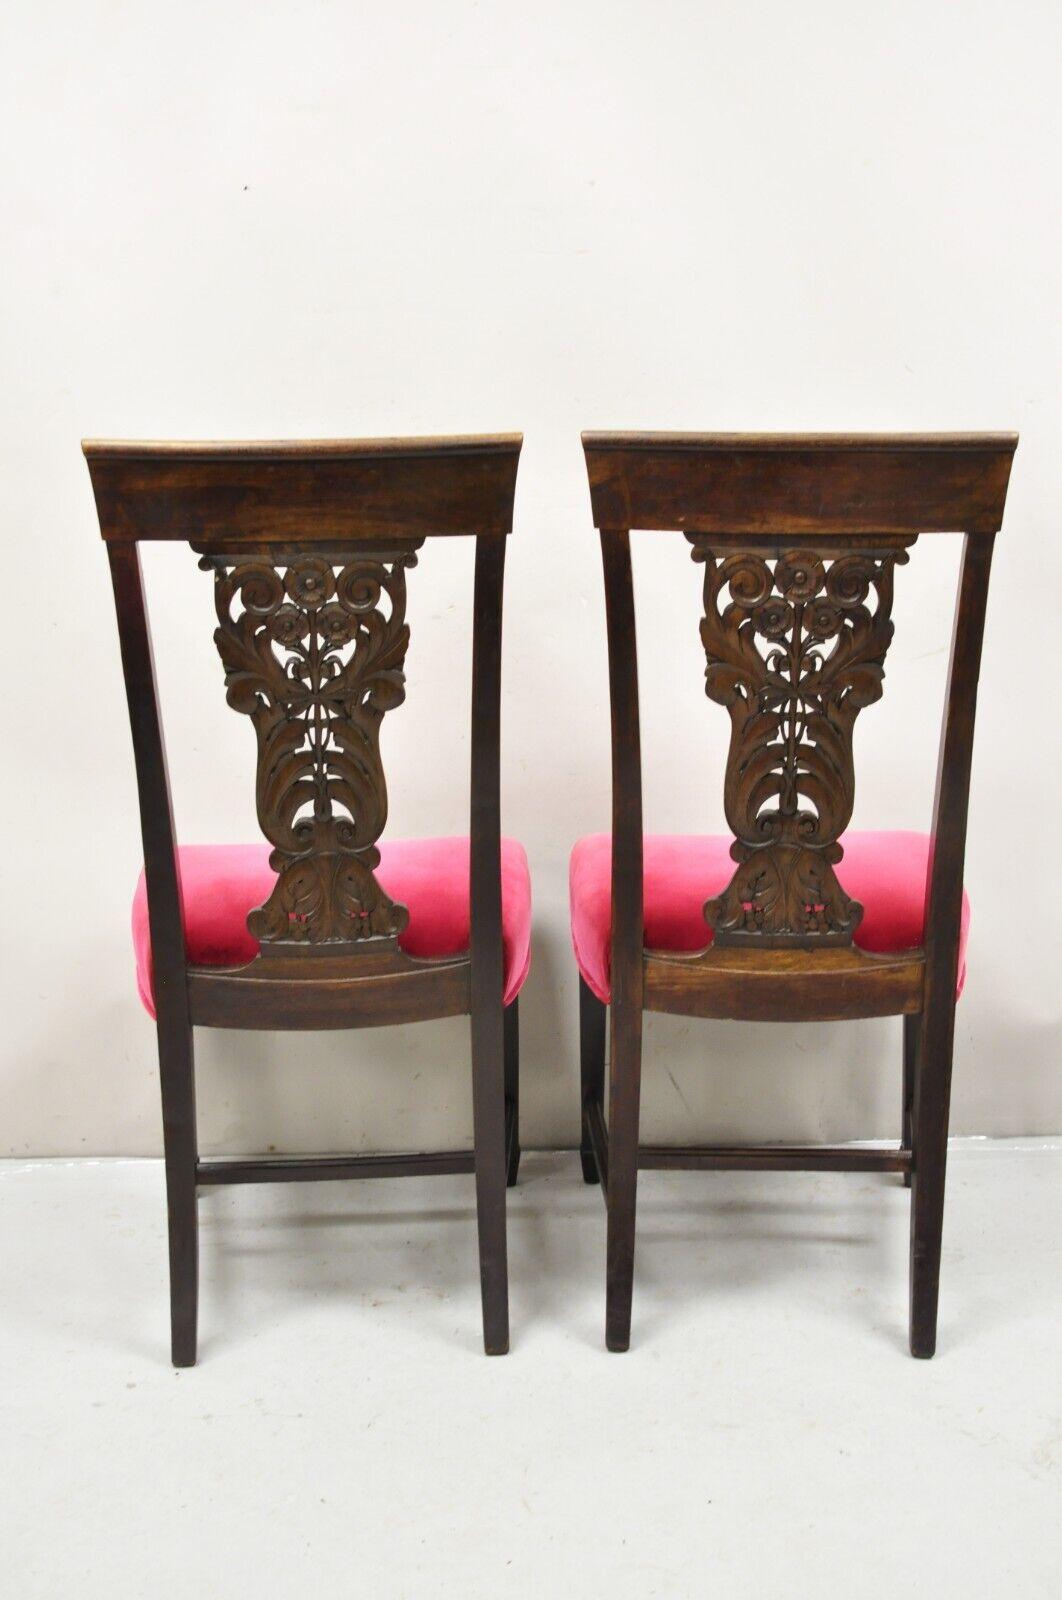 Antique Edwardian Floral Carved Mahogany Red Mohair Dining Chairs - Set of 4 For Sale 5